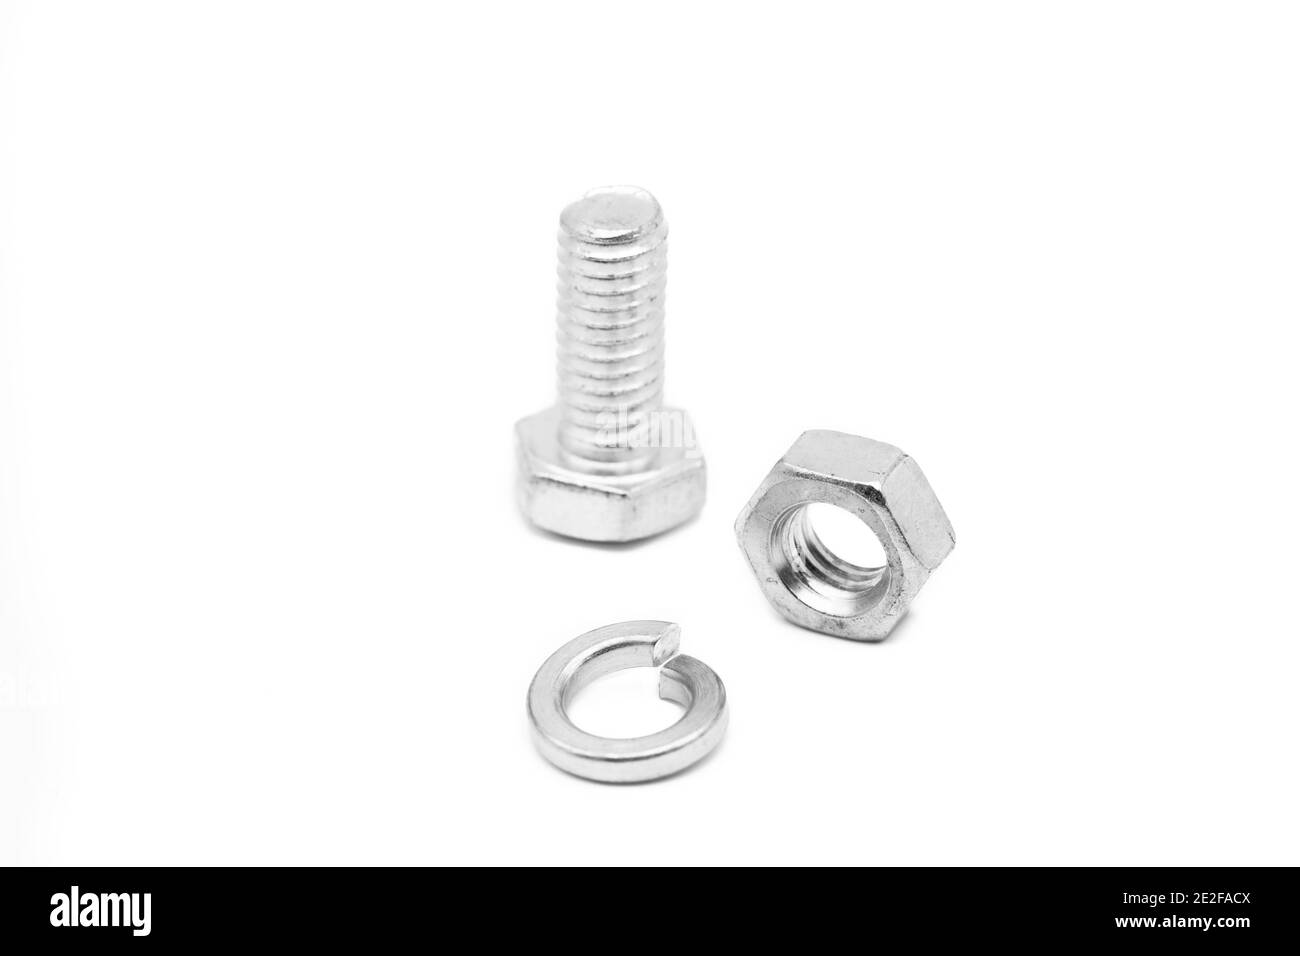 Closeup of nut and bolts isolated on a white background Stock Photo